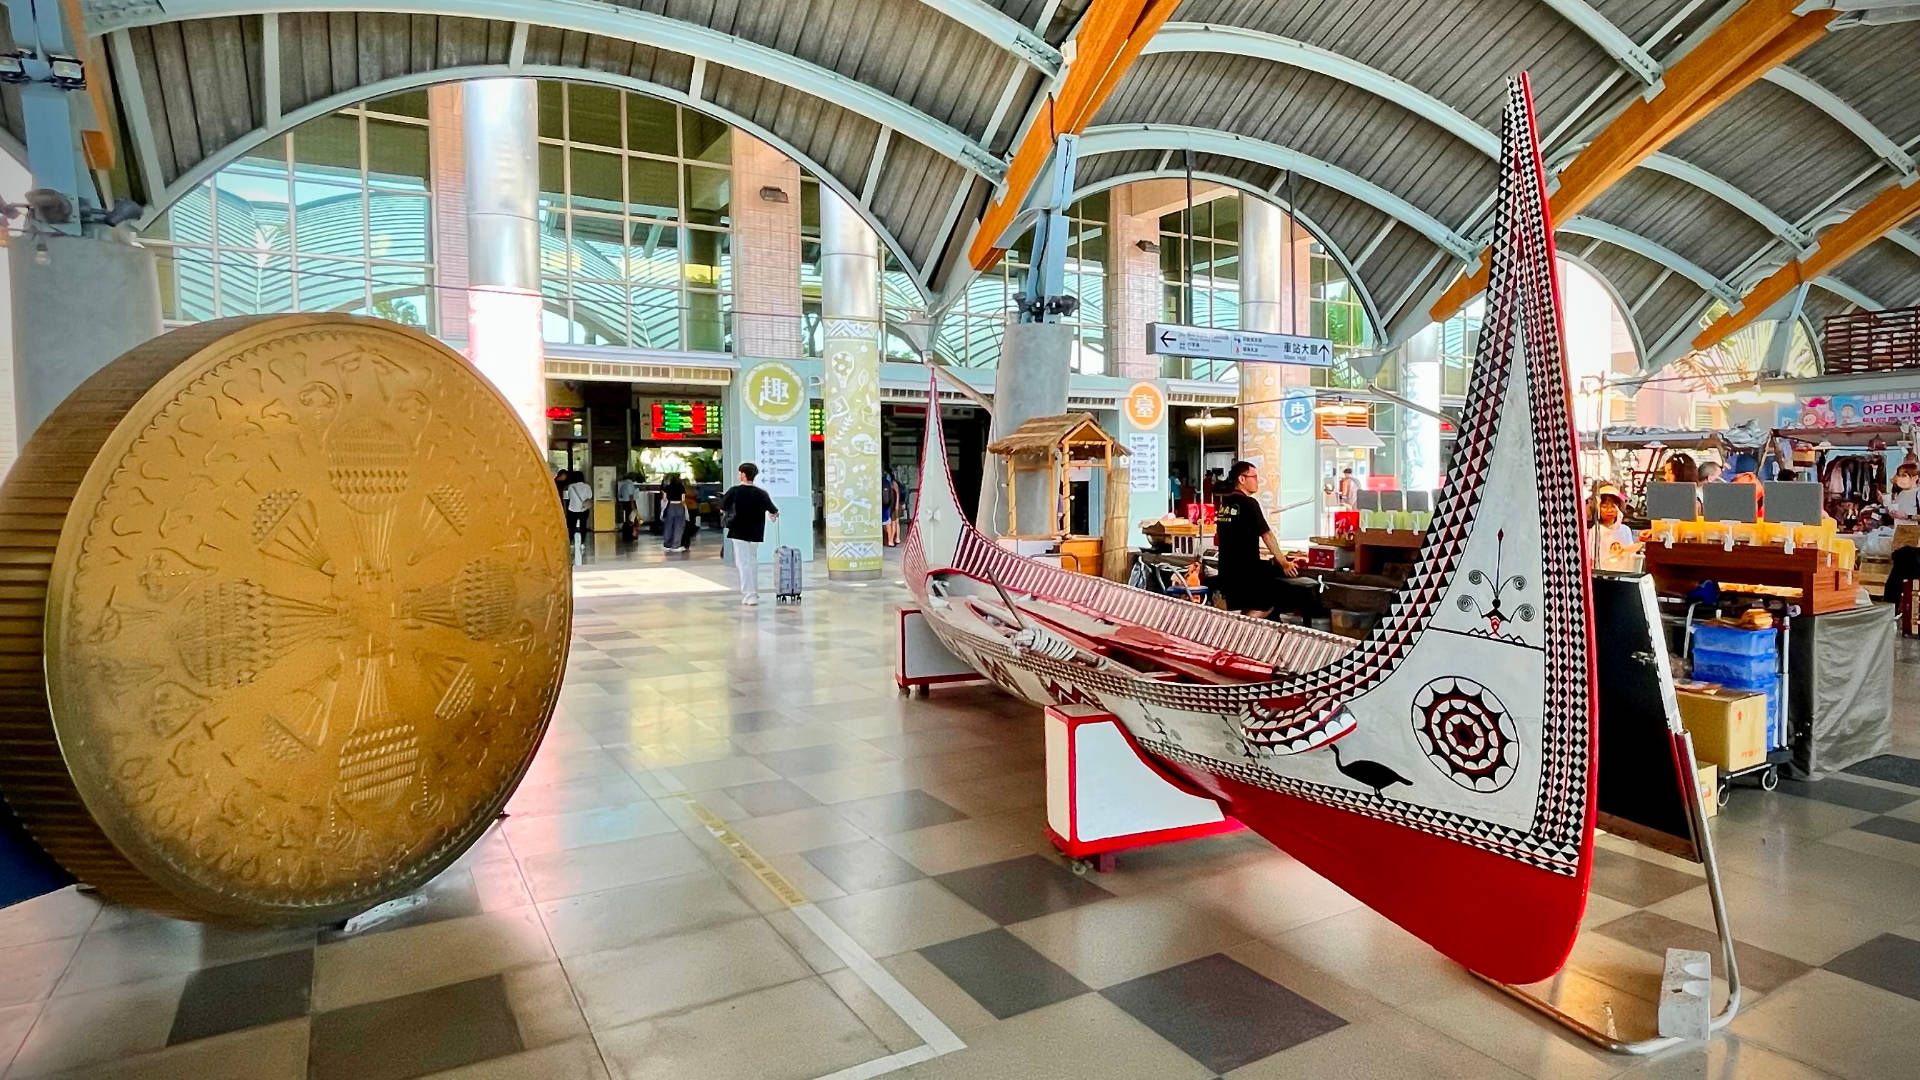 An intricately-painted indigenous canoe on a display stand under the roof of the station. The canoe is approximately 10 meters long with sharply upturned ends that stretch a meter in to the sky. It looks like it may accommodate 2–4 paddlers.